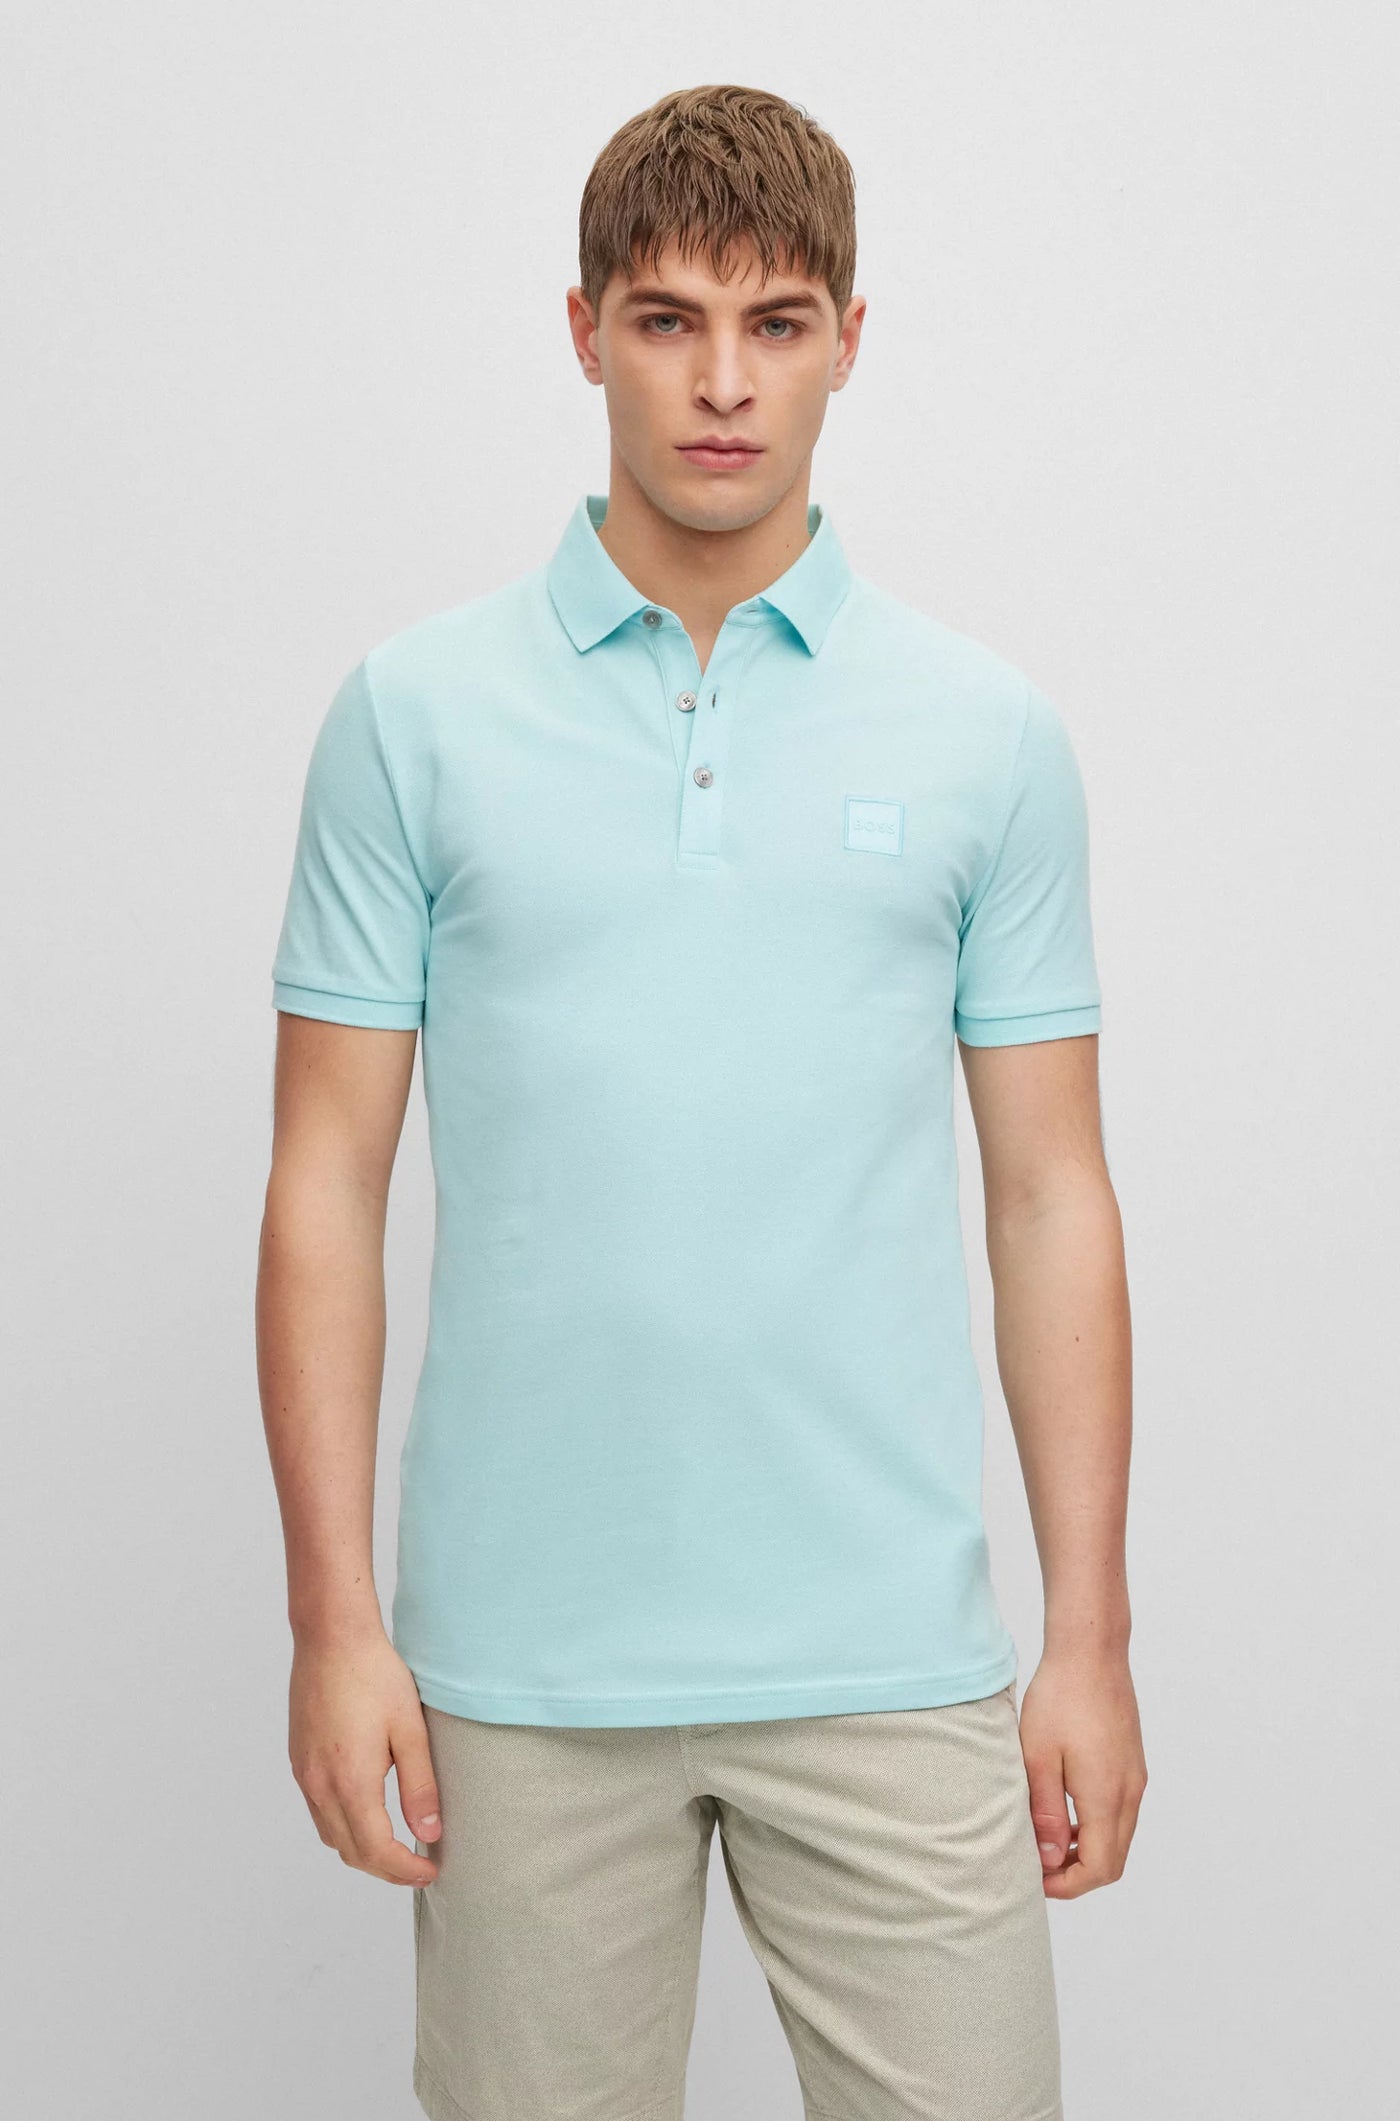 Passenger Polo in Baby Blue